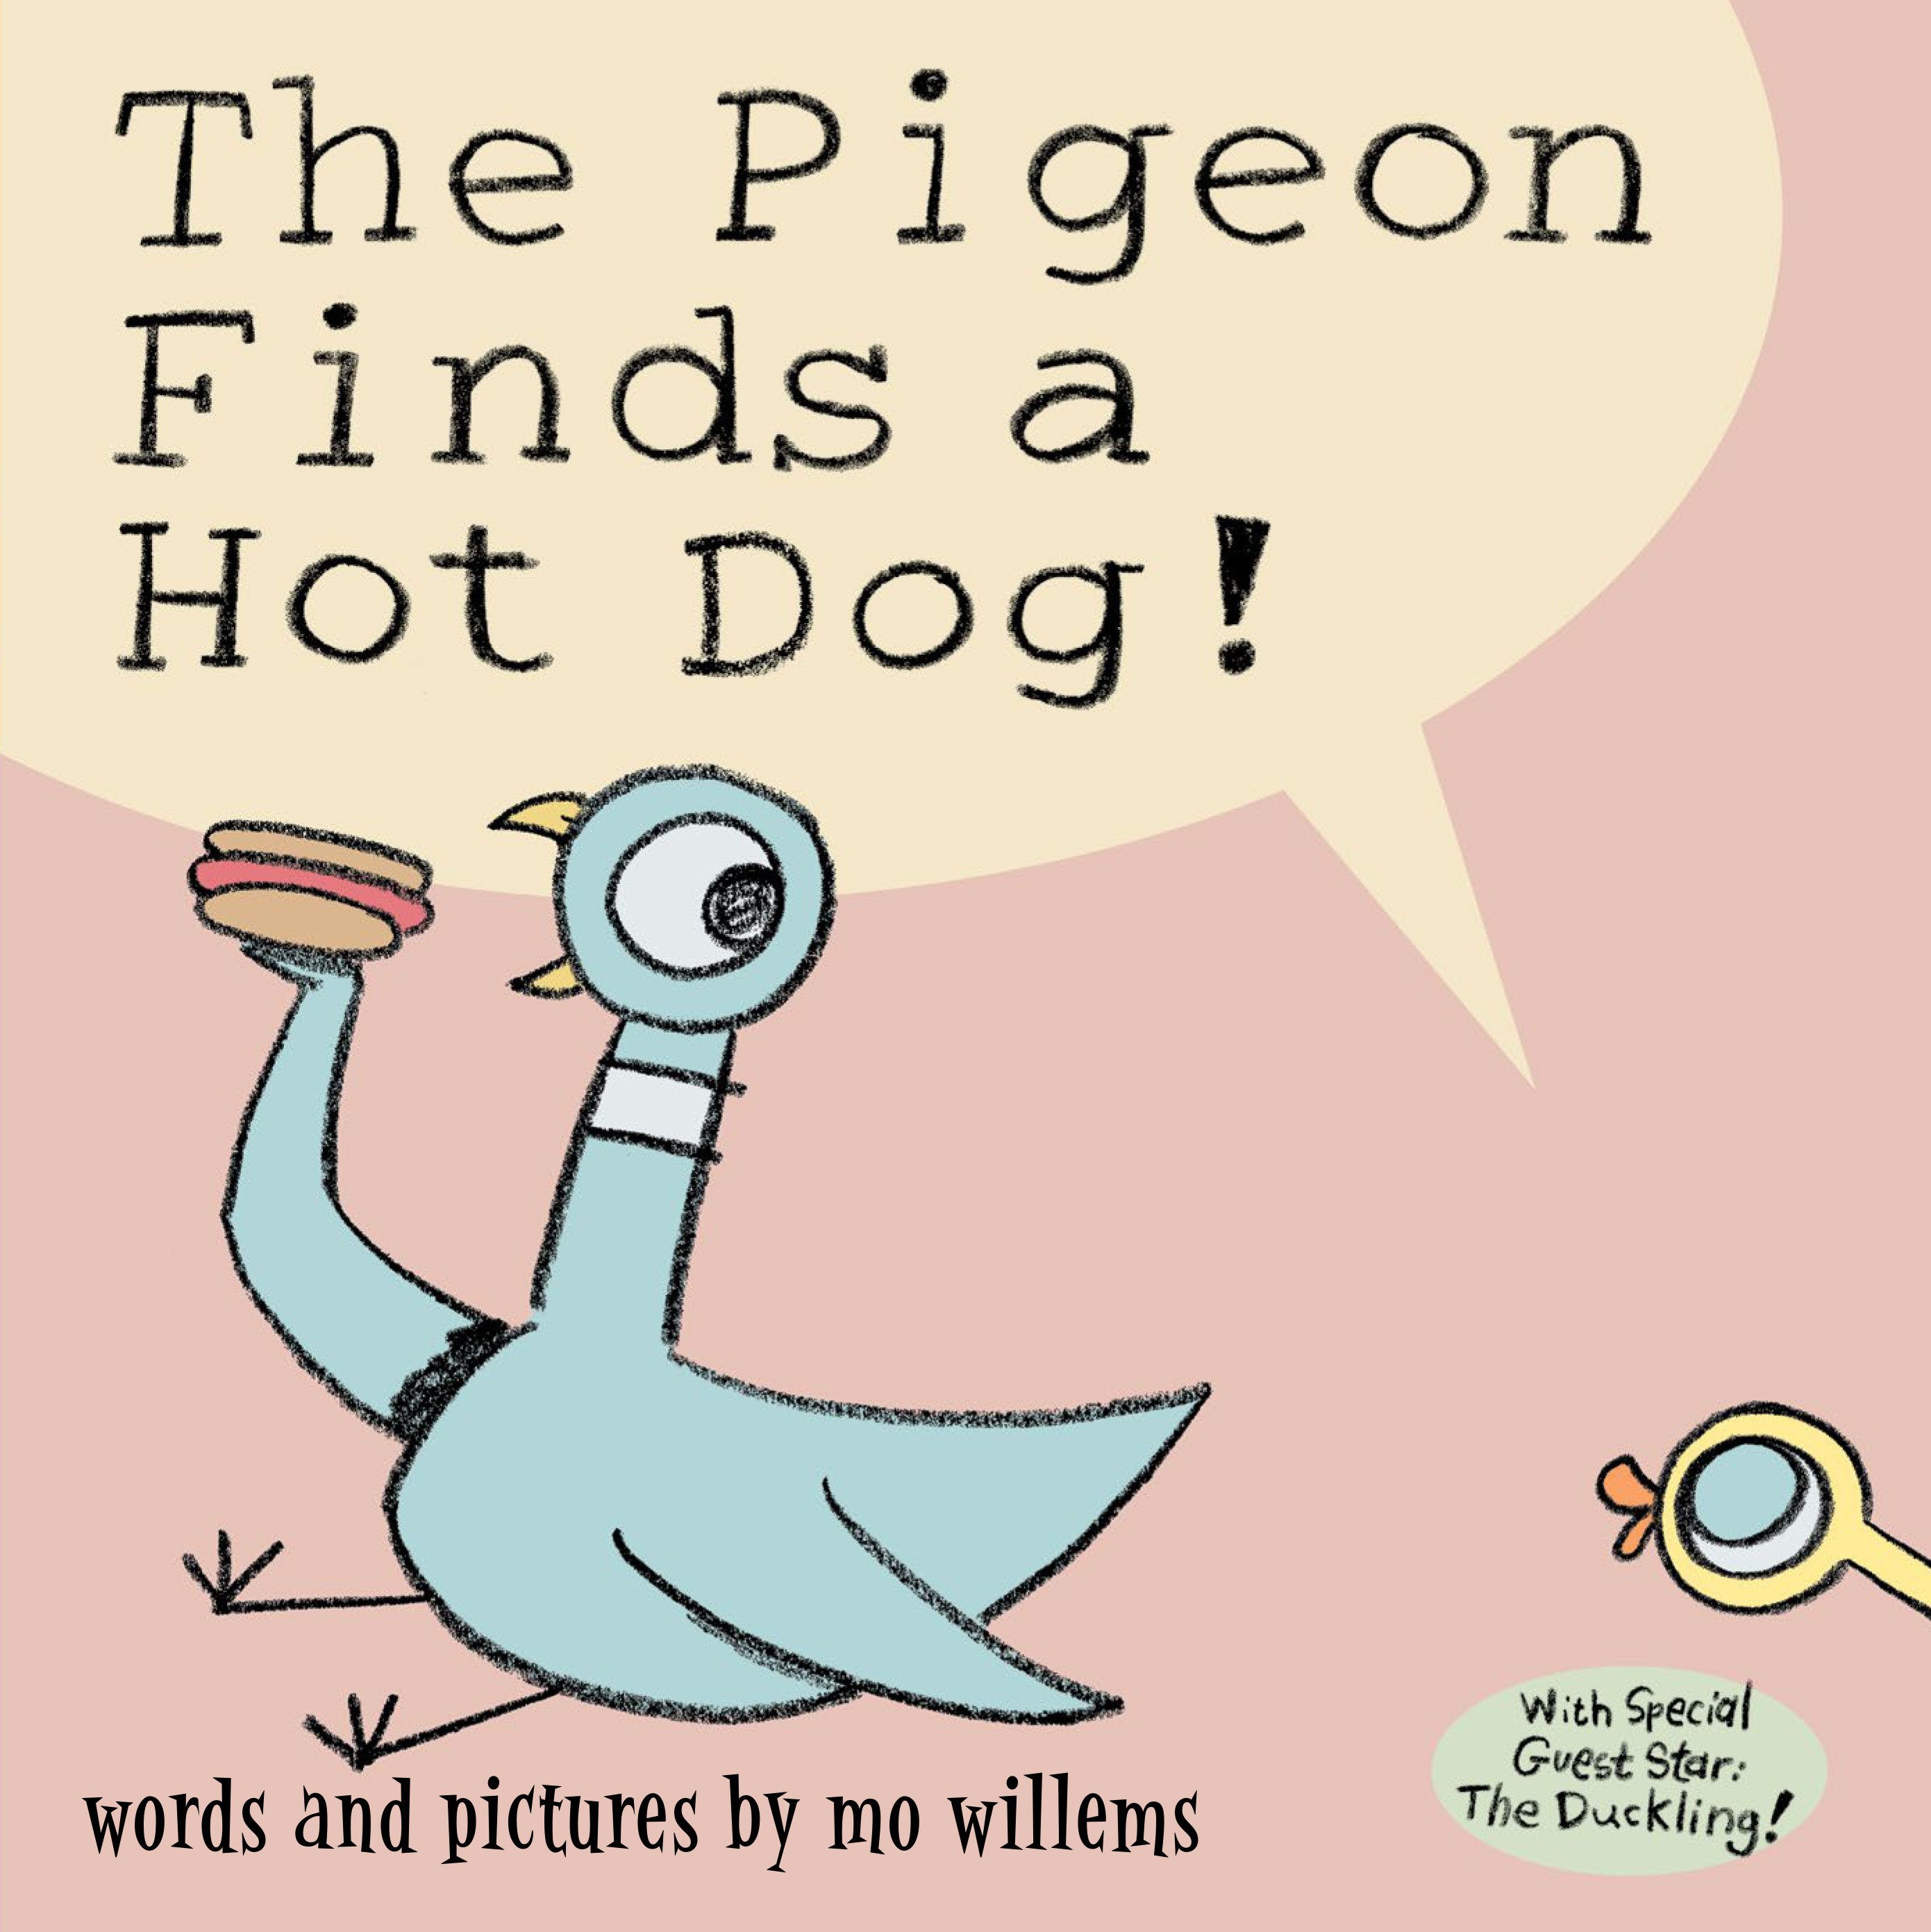 Pigeon Finds A Hot Dog!, The (Hardcover Book)